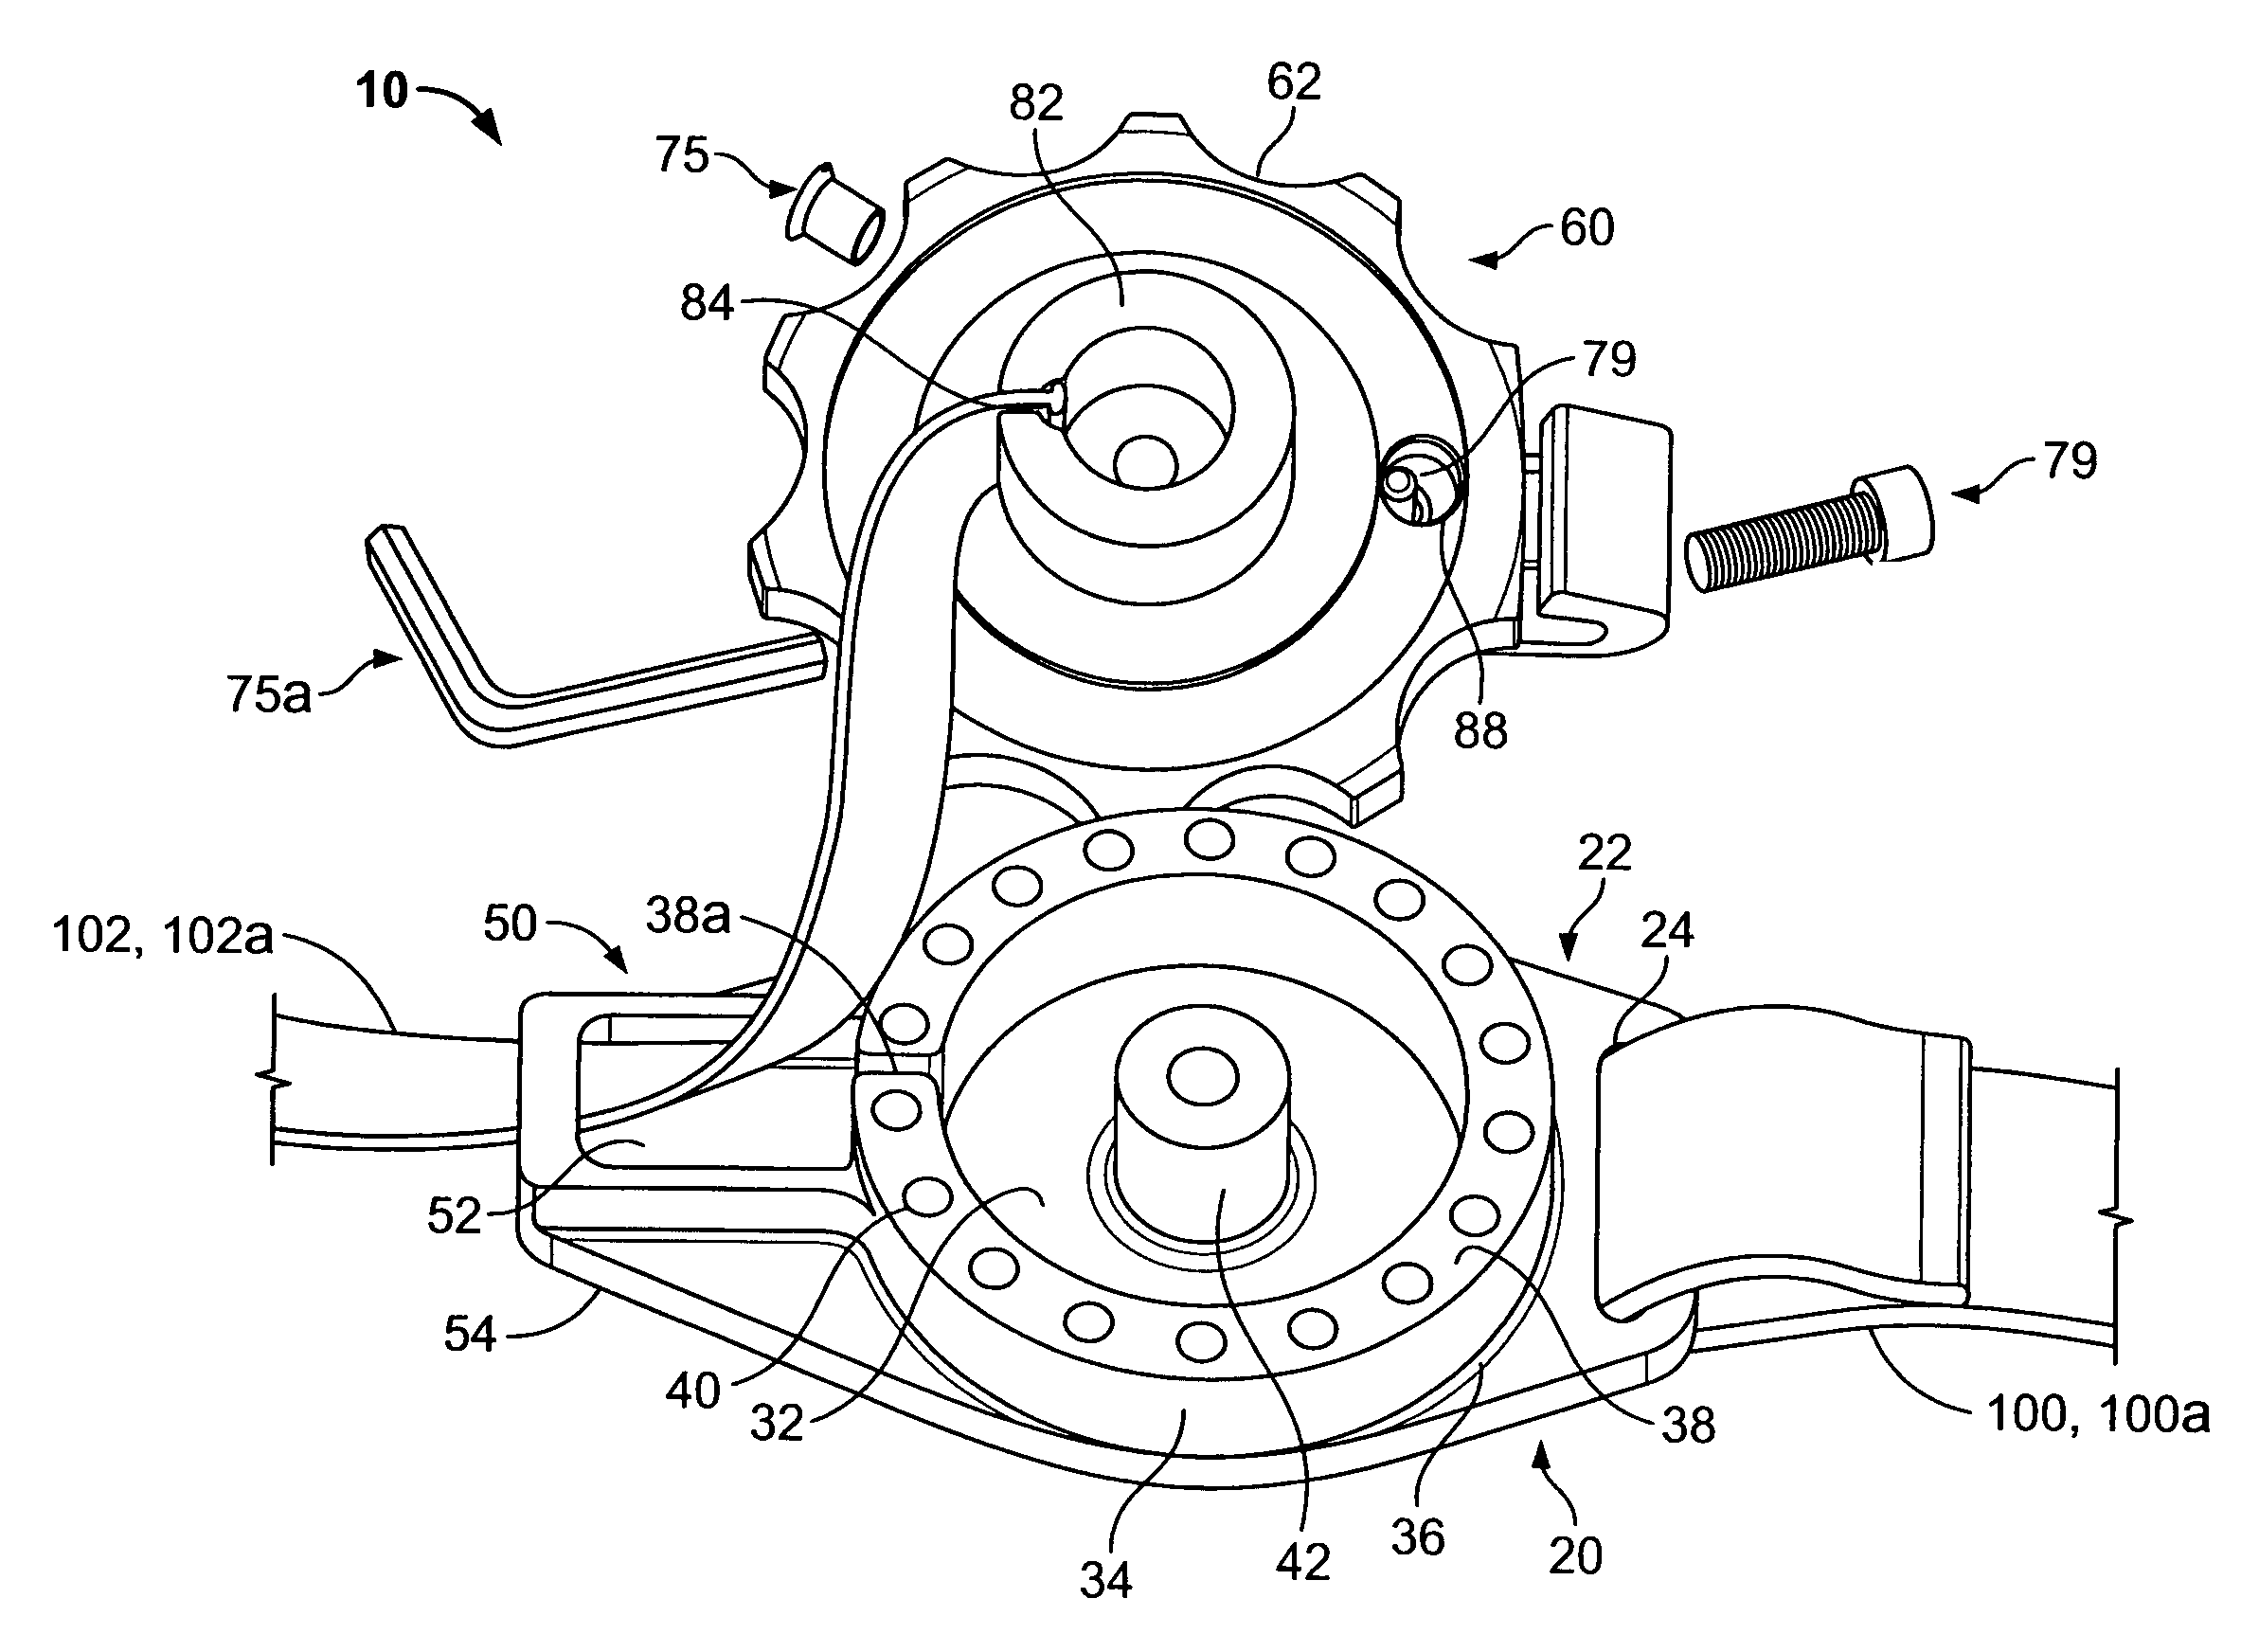 Animate load bearer radial adjuster device for cargo transport carriers